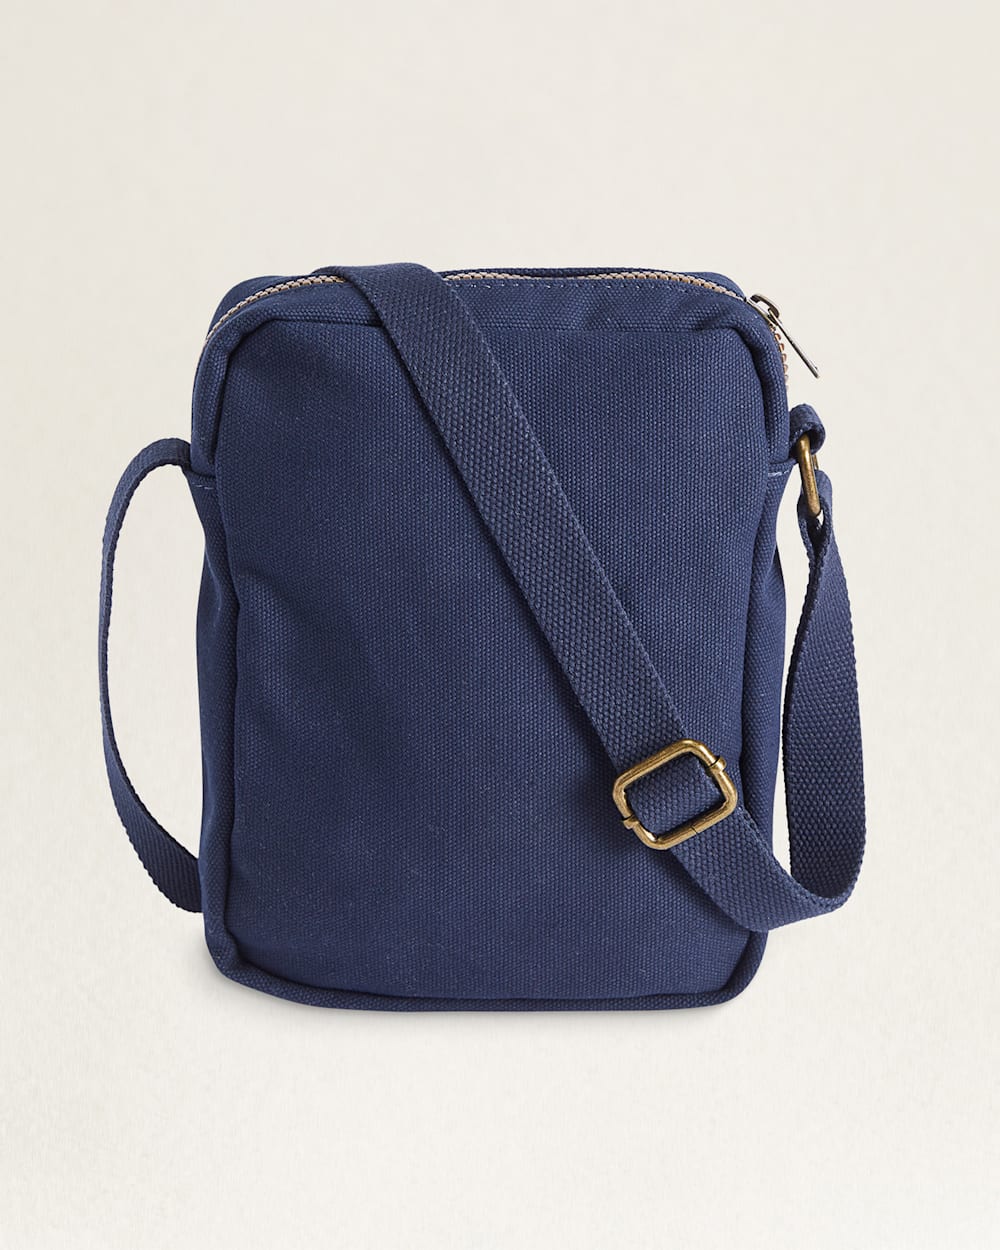 ALTERNATE VIEW OF LIMITED EDITION HARDING CROSSBODY SATCHEL IN ROYAL BLUE image number 2